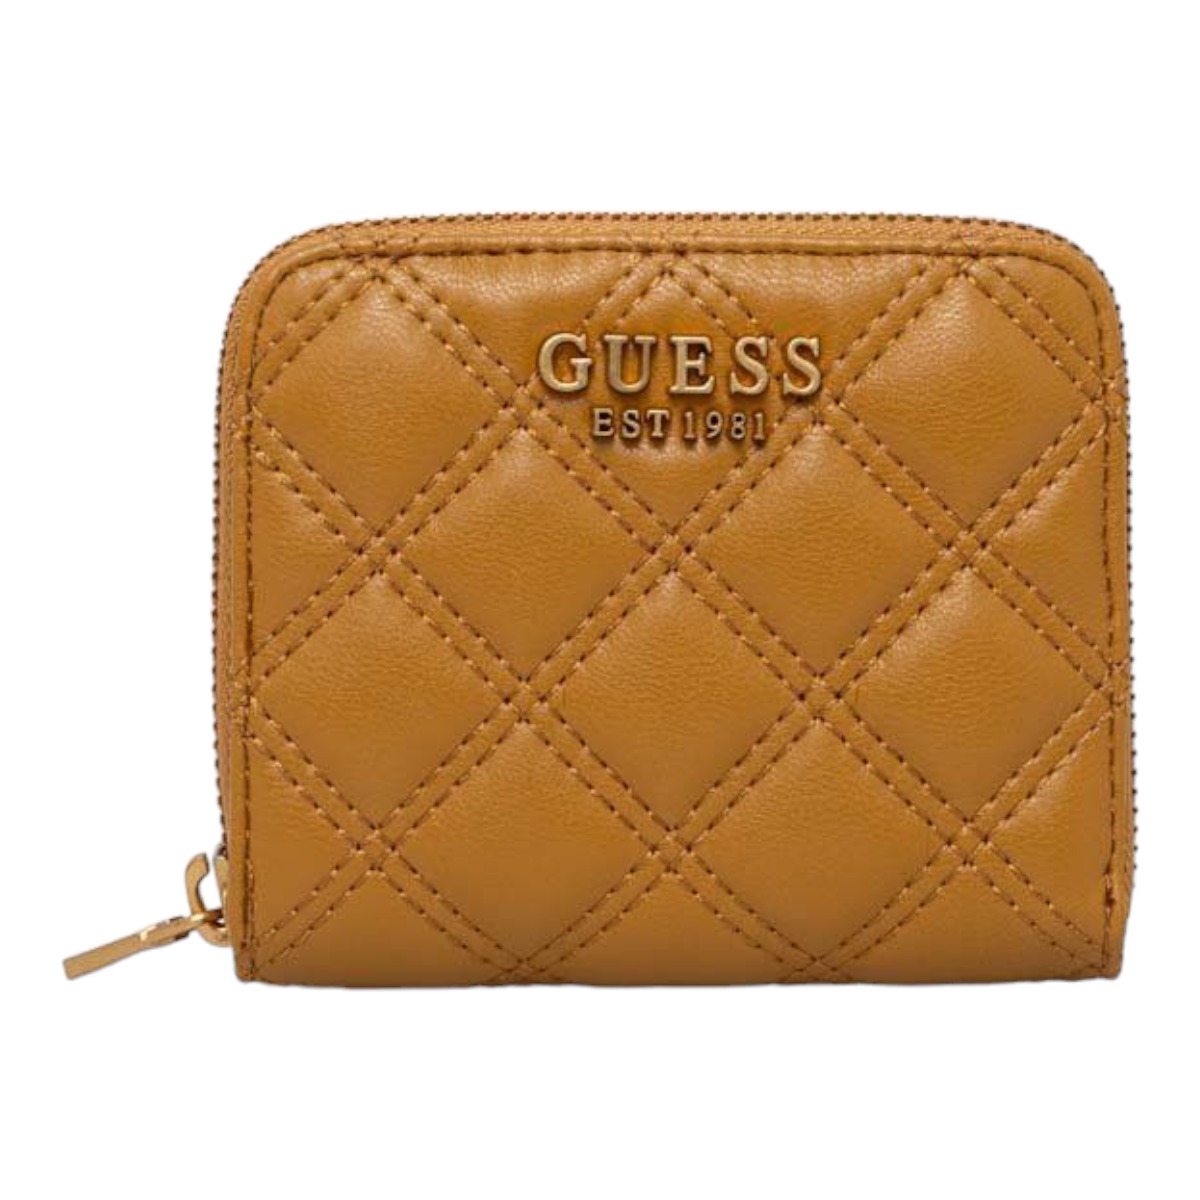 Guess Woman's Wallet 5905655080528